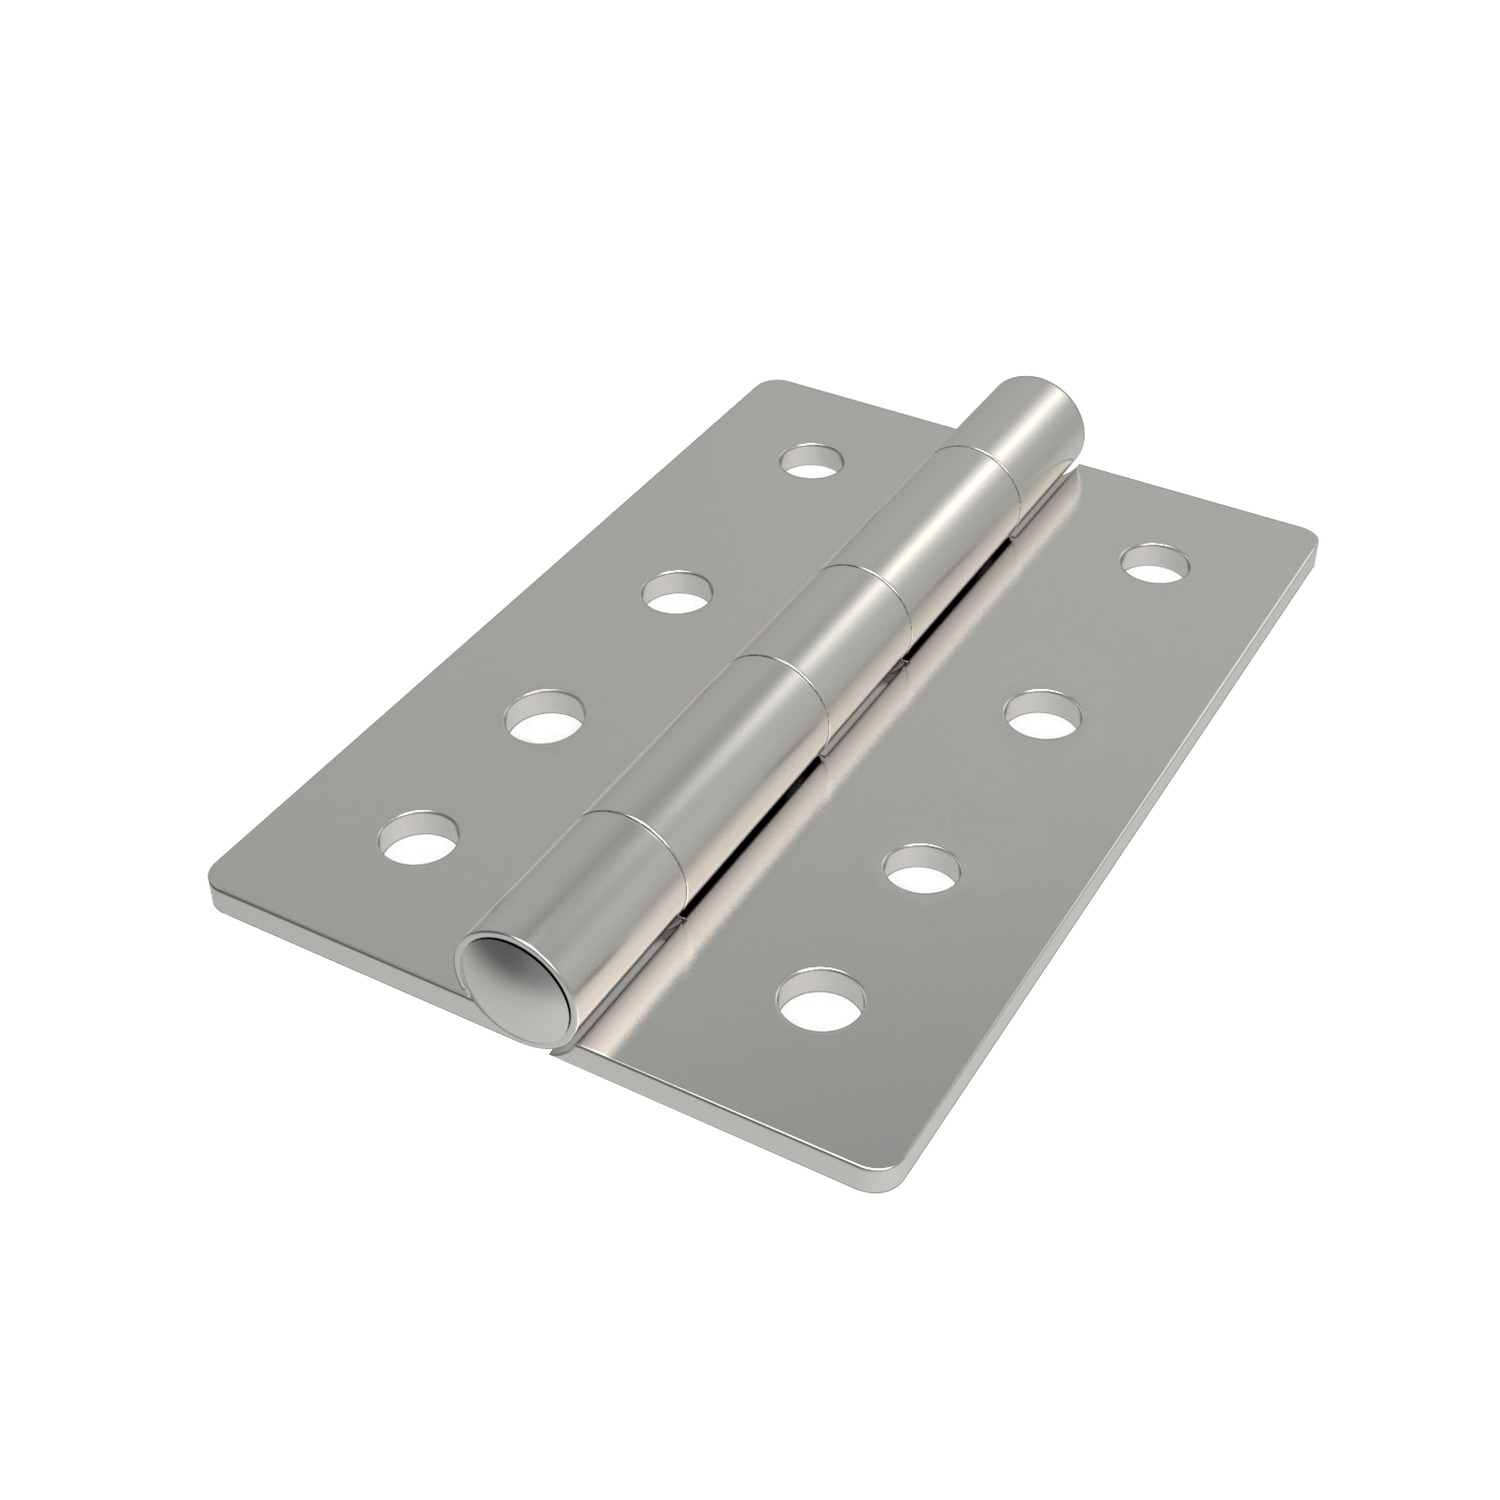 S0780.AC0090 Surface Mount - Leaf Hinges Screw mount - Stainless steel. 90 x 60. Also known as 52380.W0090